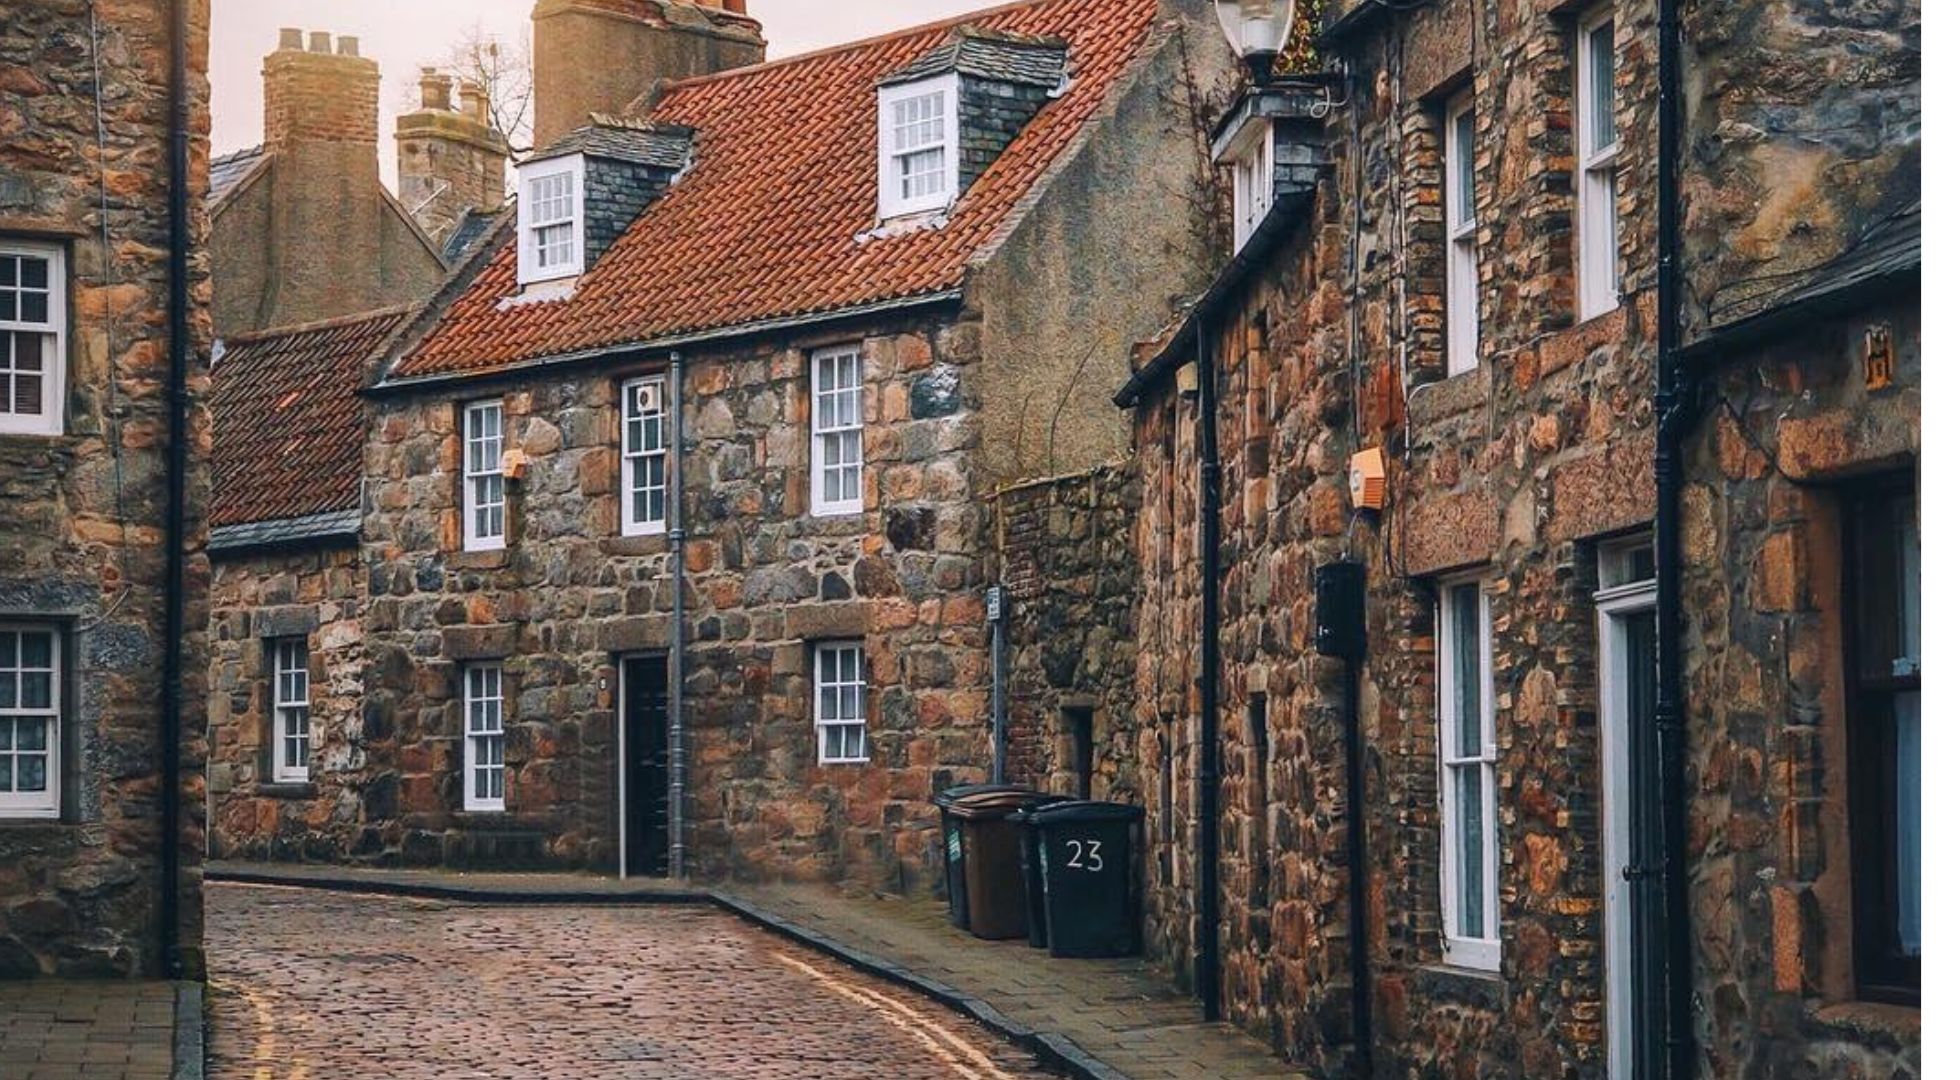 The street to walk on in Scotland